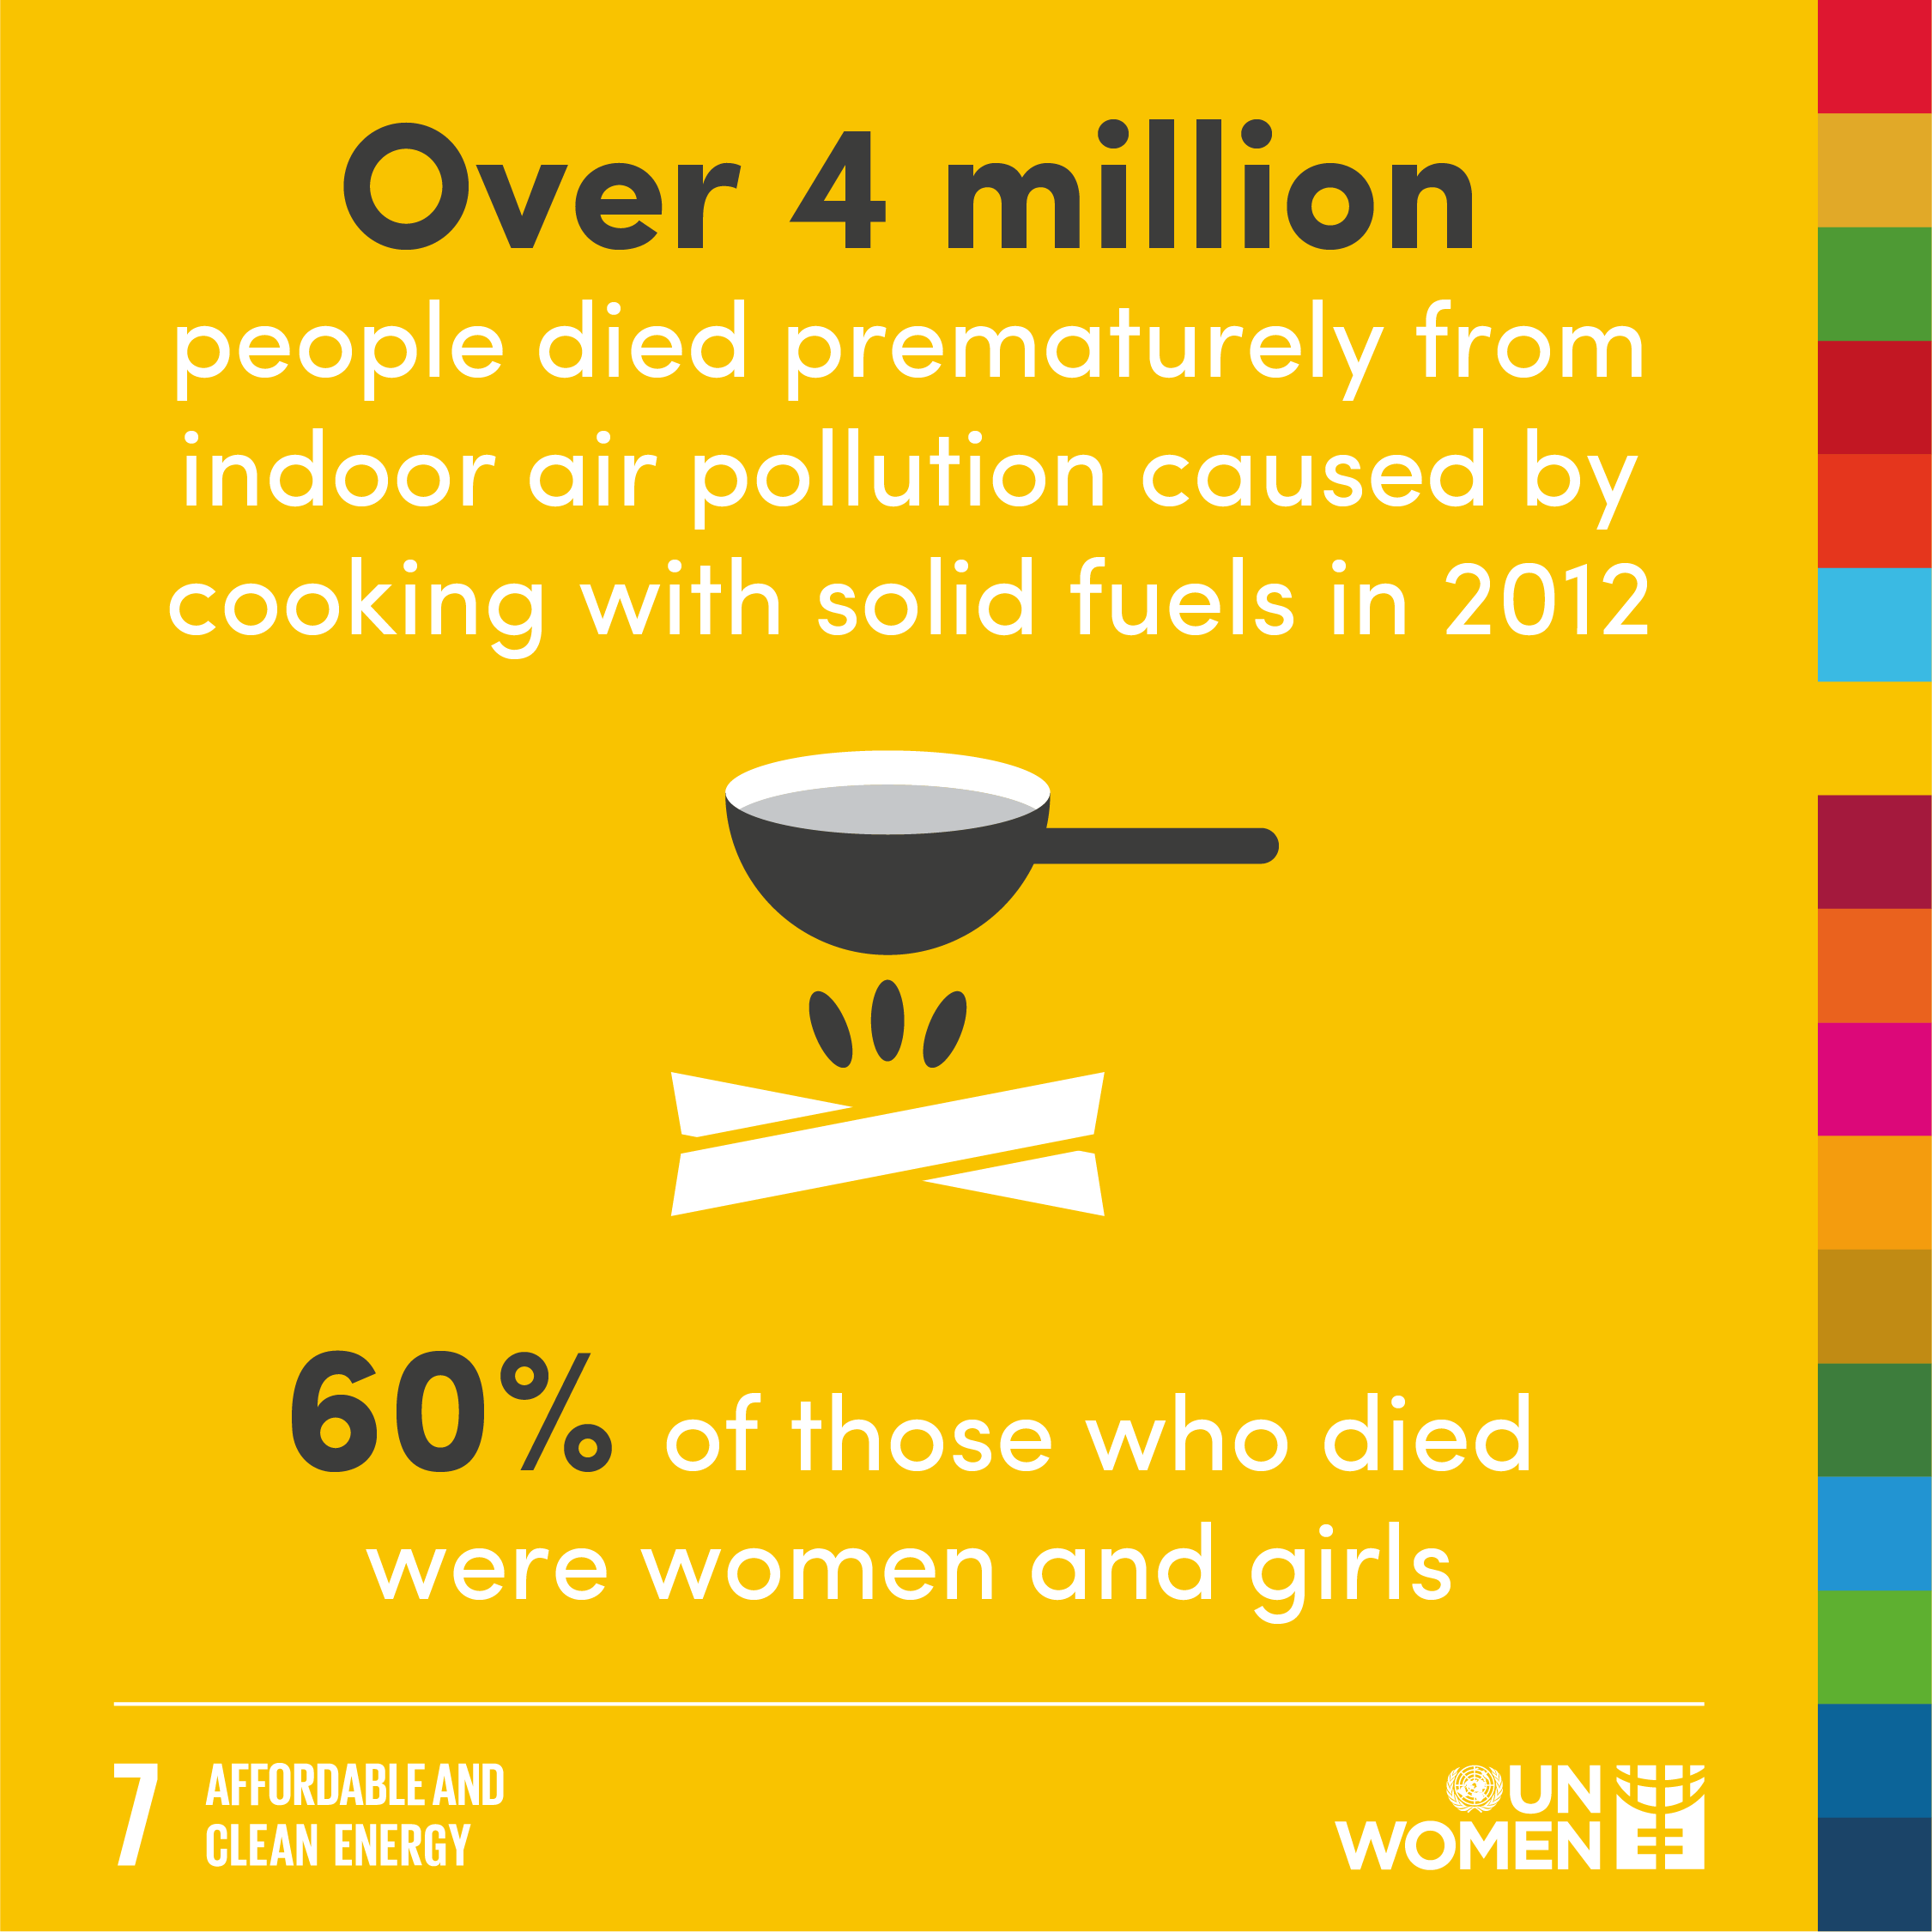 Over 4 million people died prematurely from indoor air pollution caused by cooking with solid fuels in 2012. 60% of those who died were women and girls. 